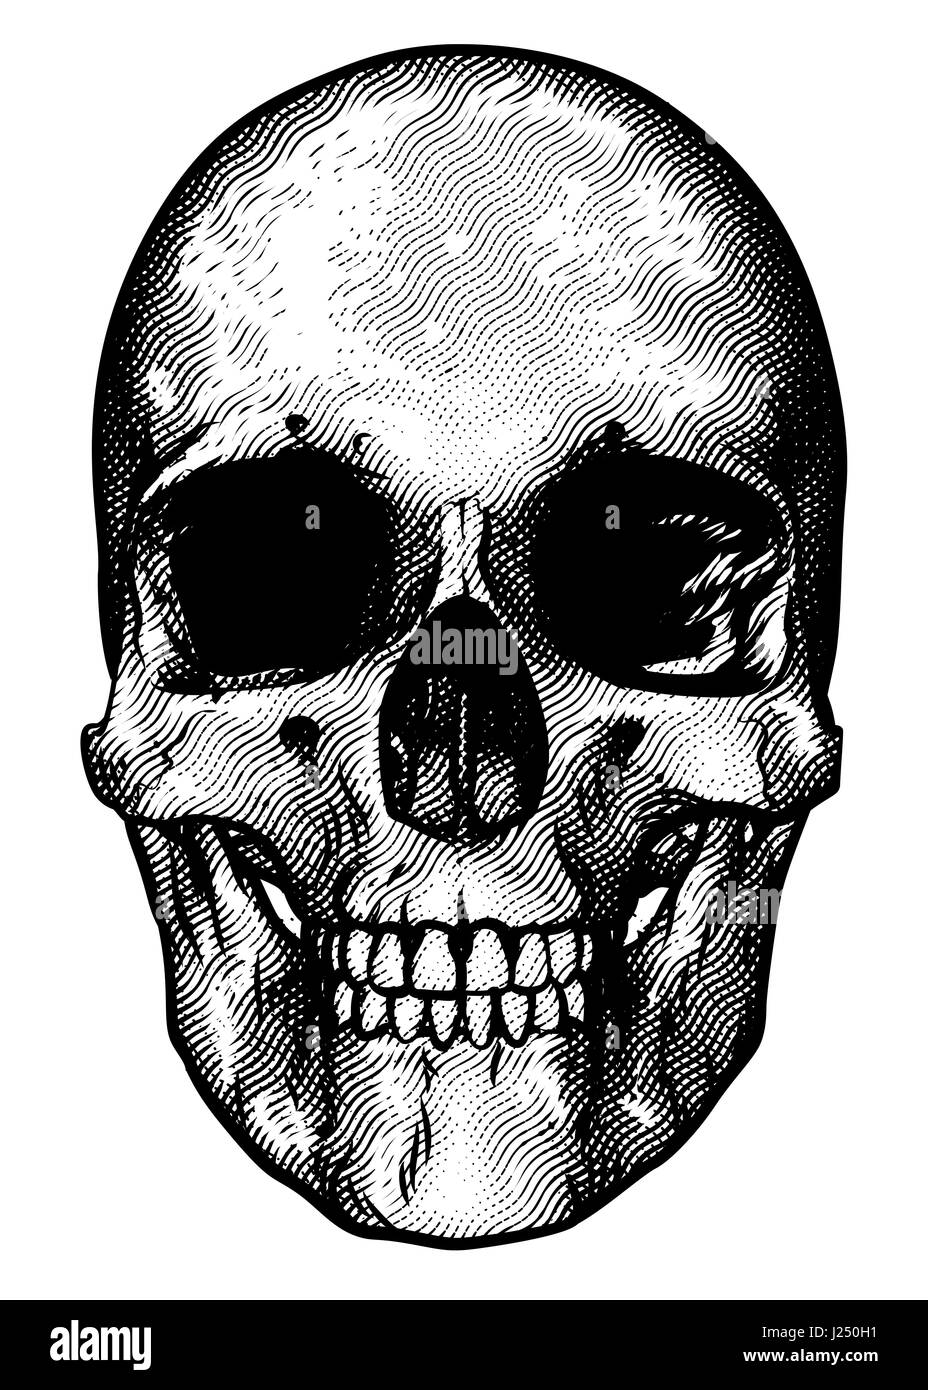 Skull drawing in a vintage retro woodcut etched or engraved style Stock Photo